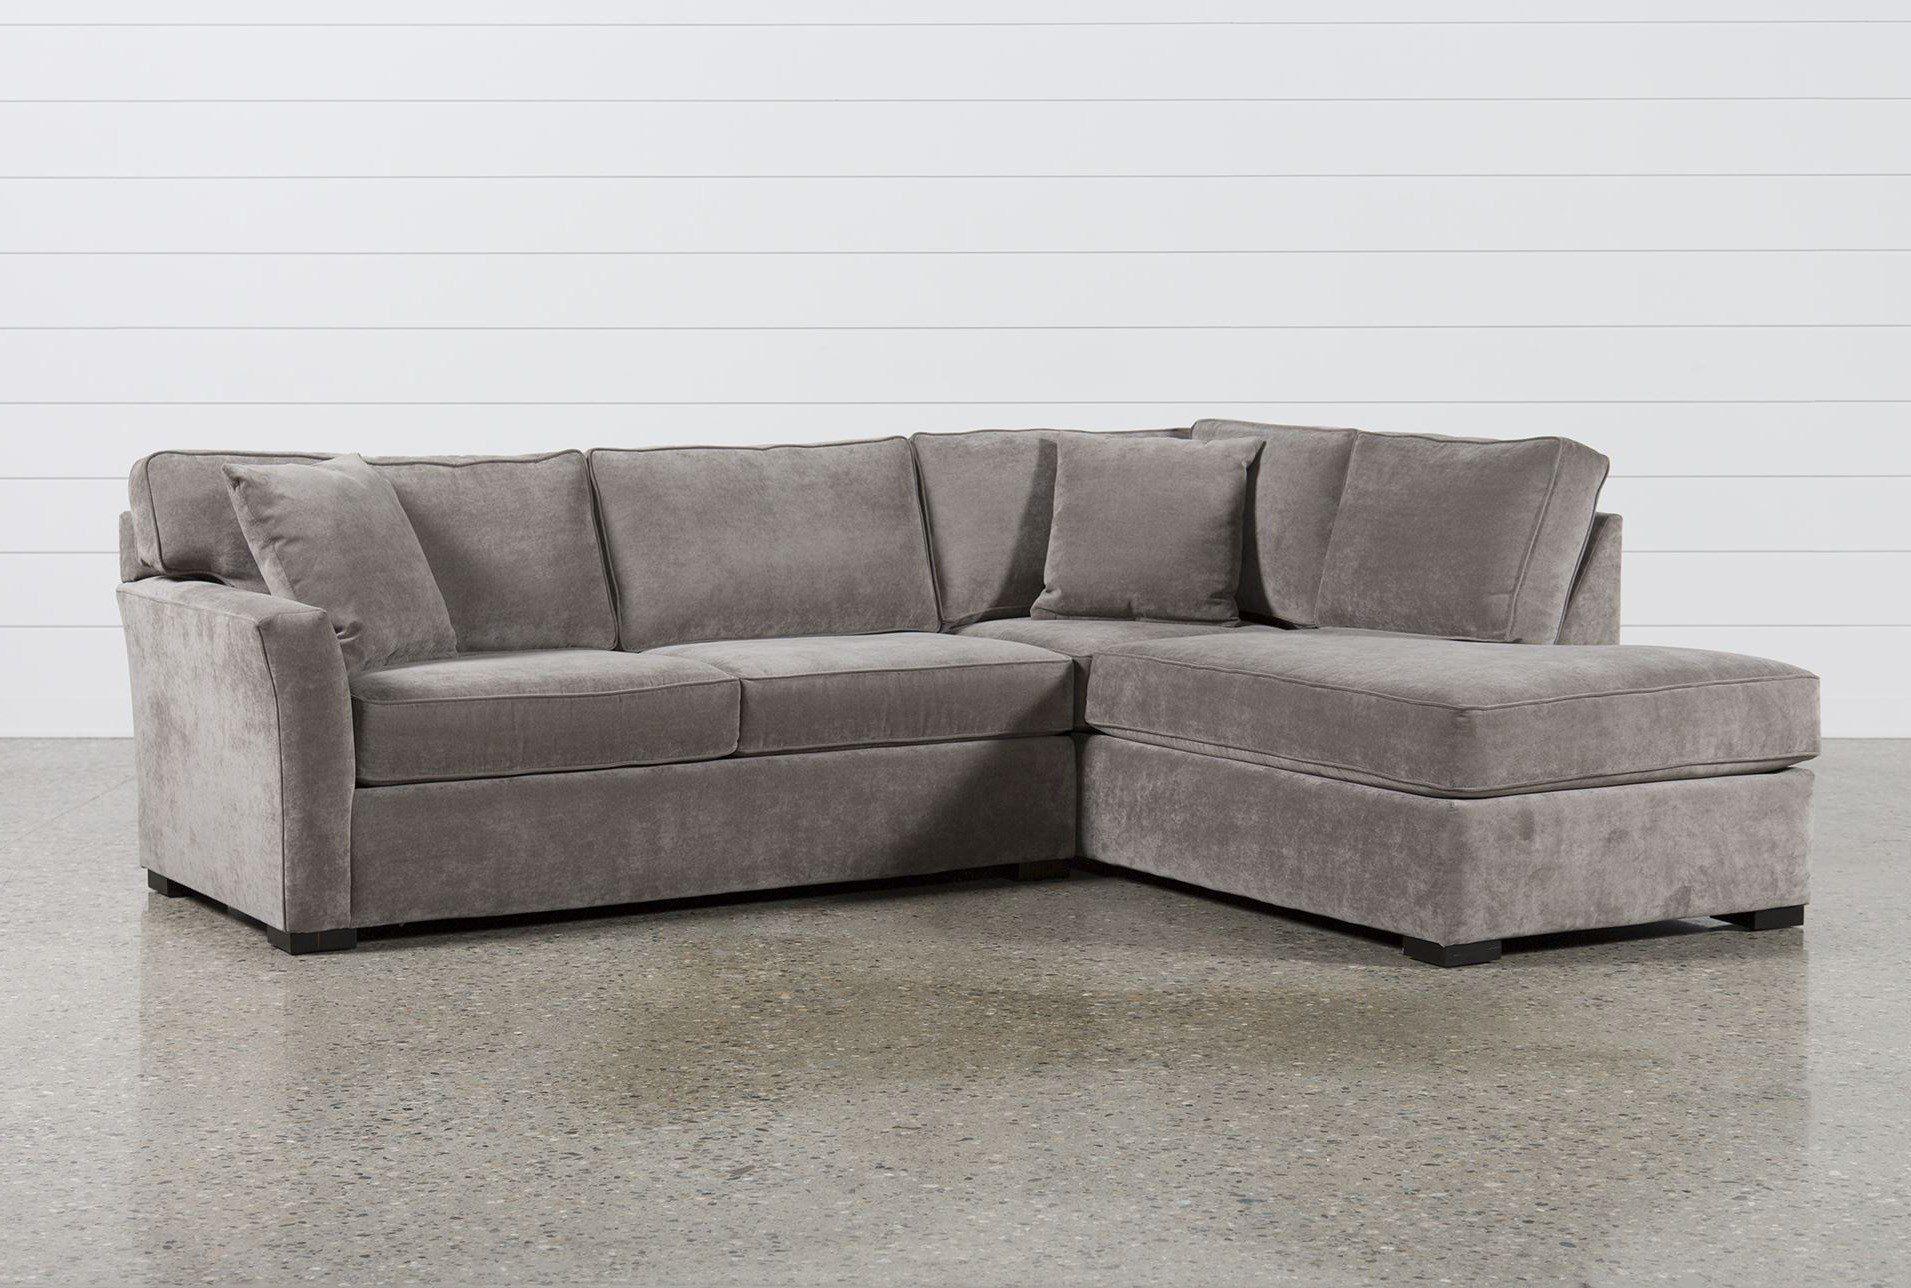 2 piece sectional sofa bed